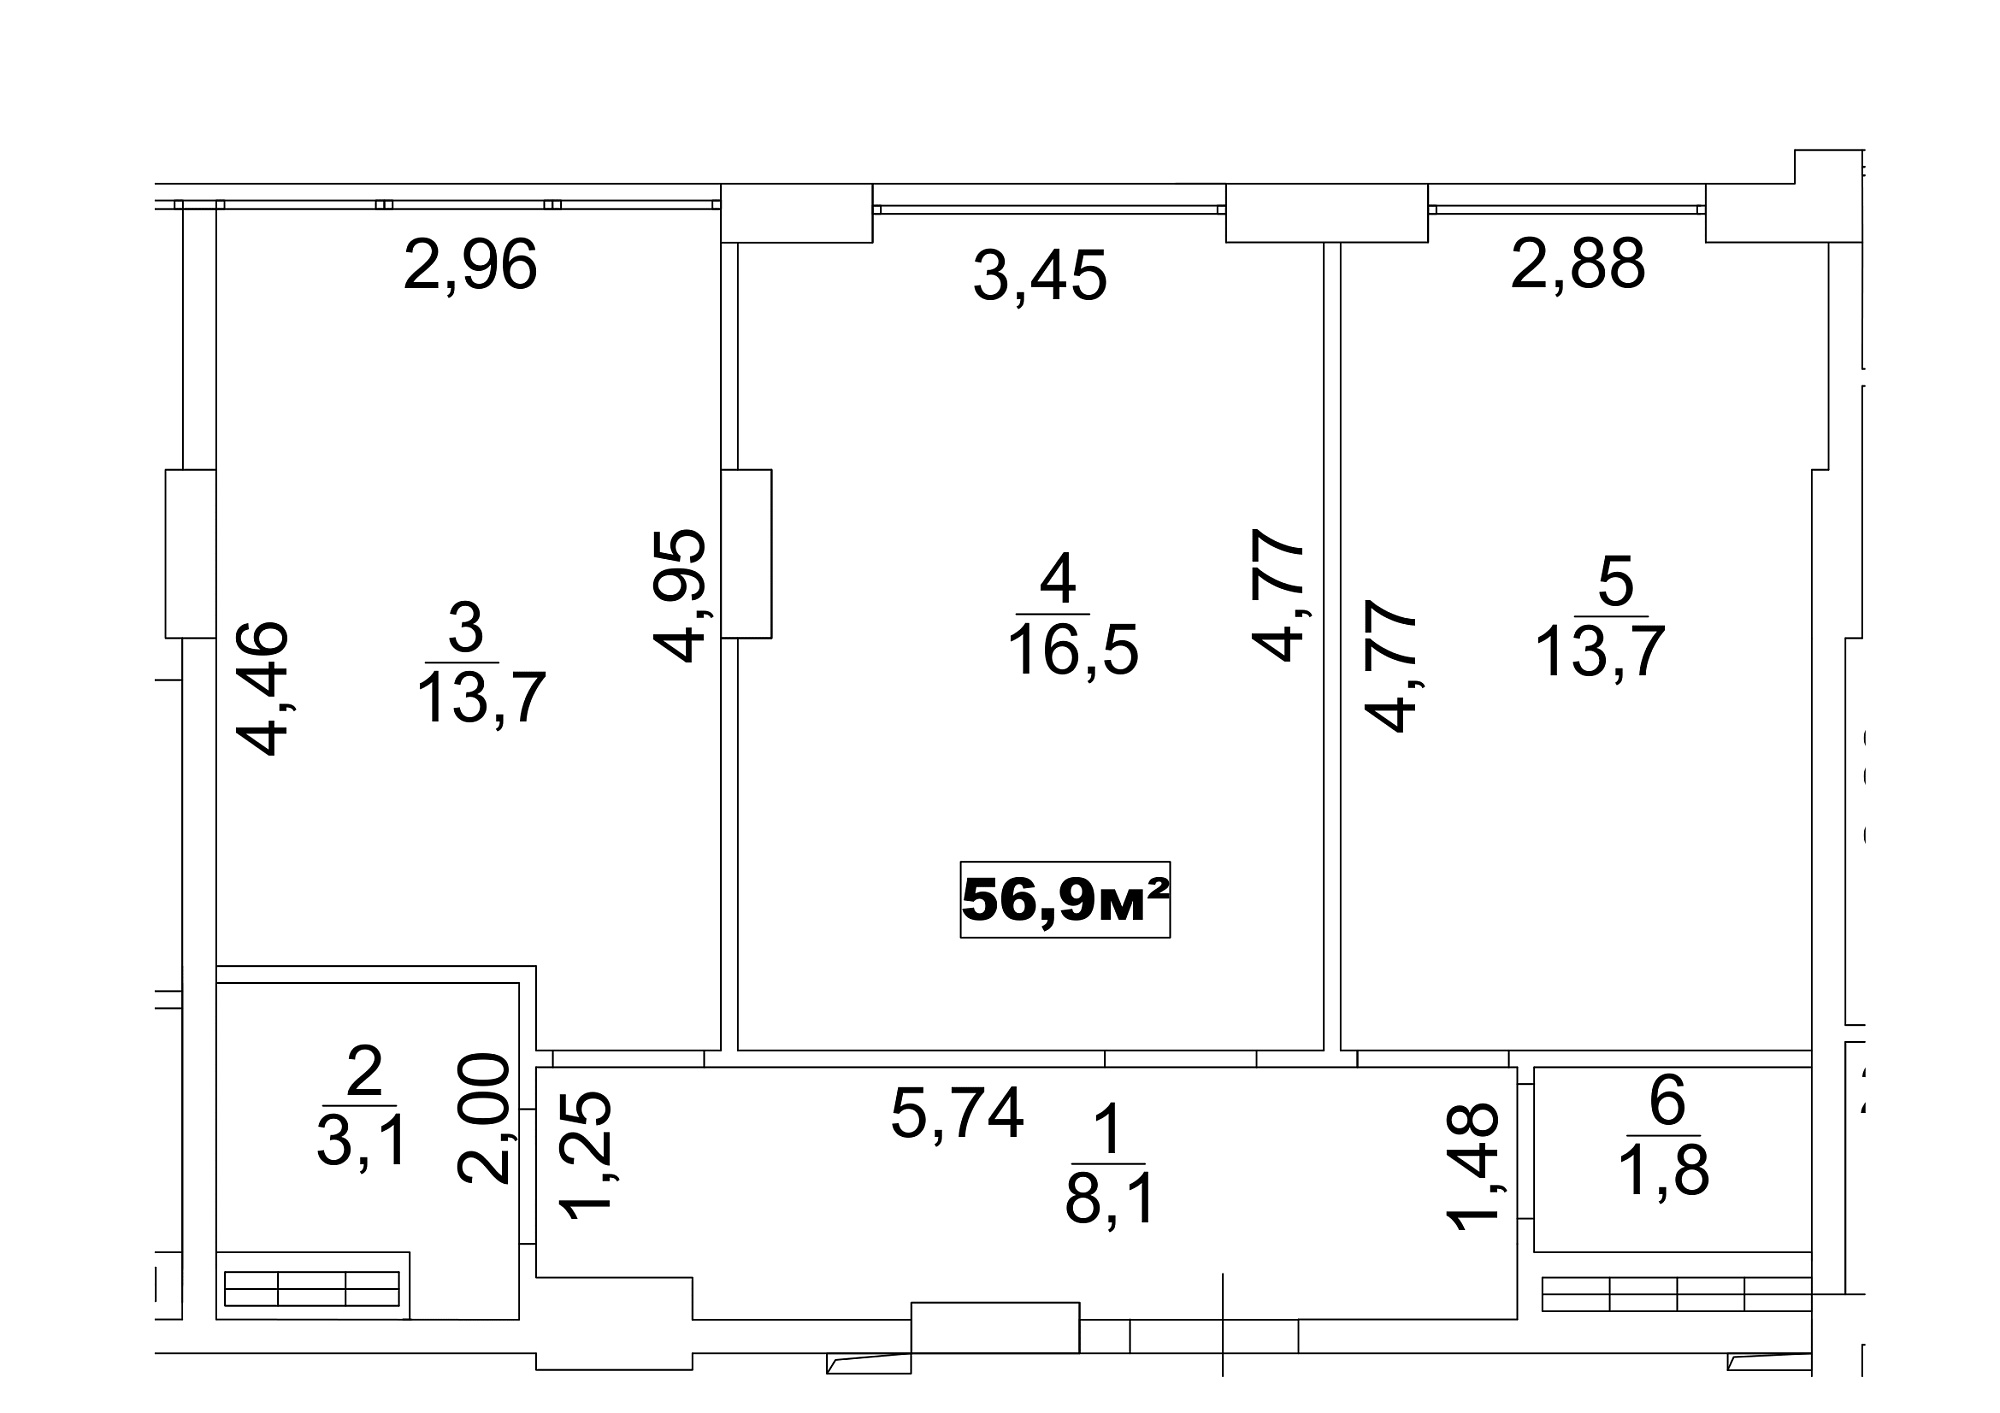 Planning 2-rm flats area 56.9m2, AB-13-04/00028.